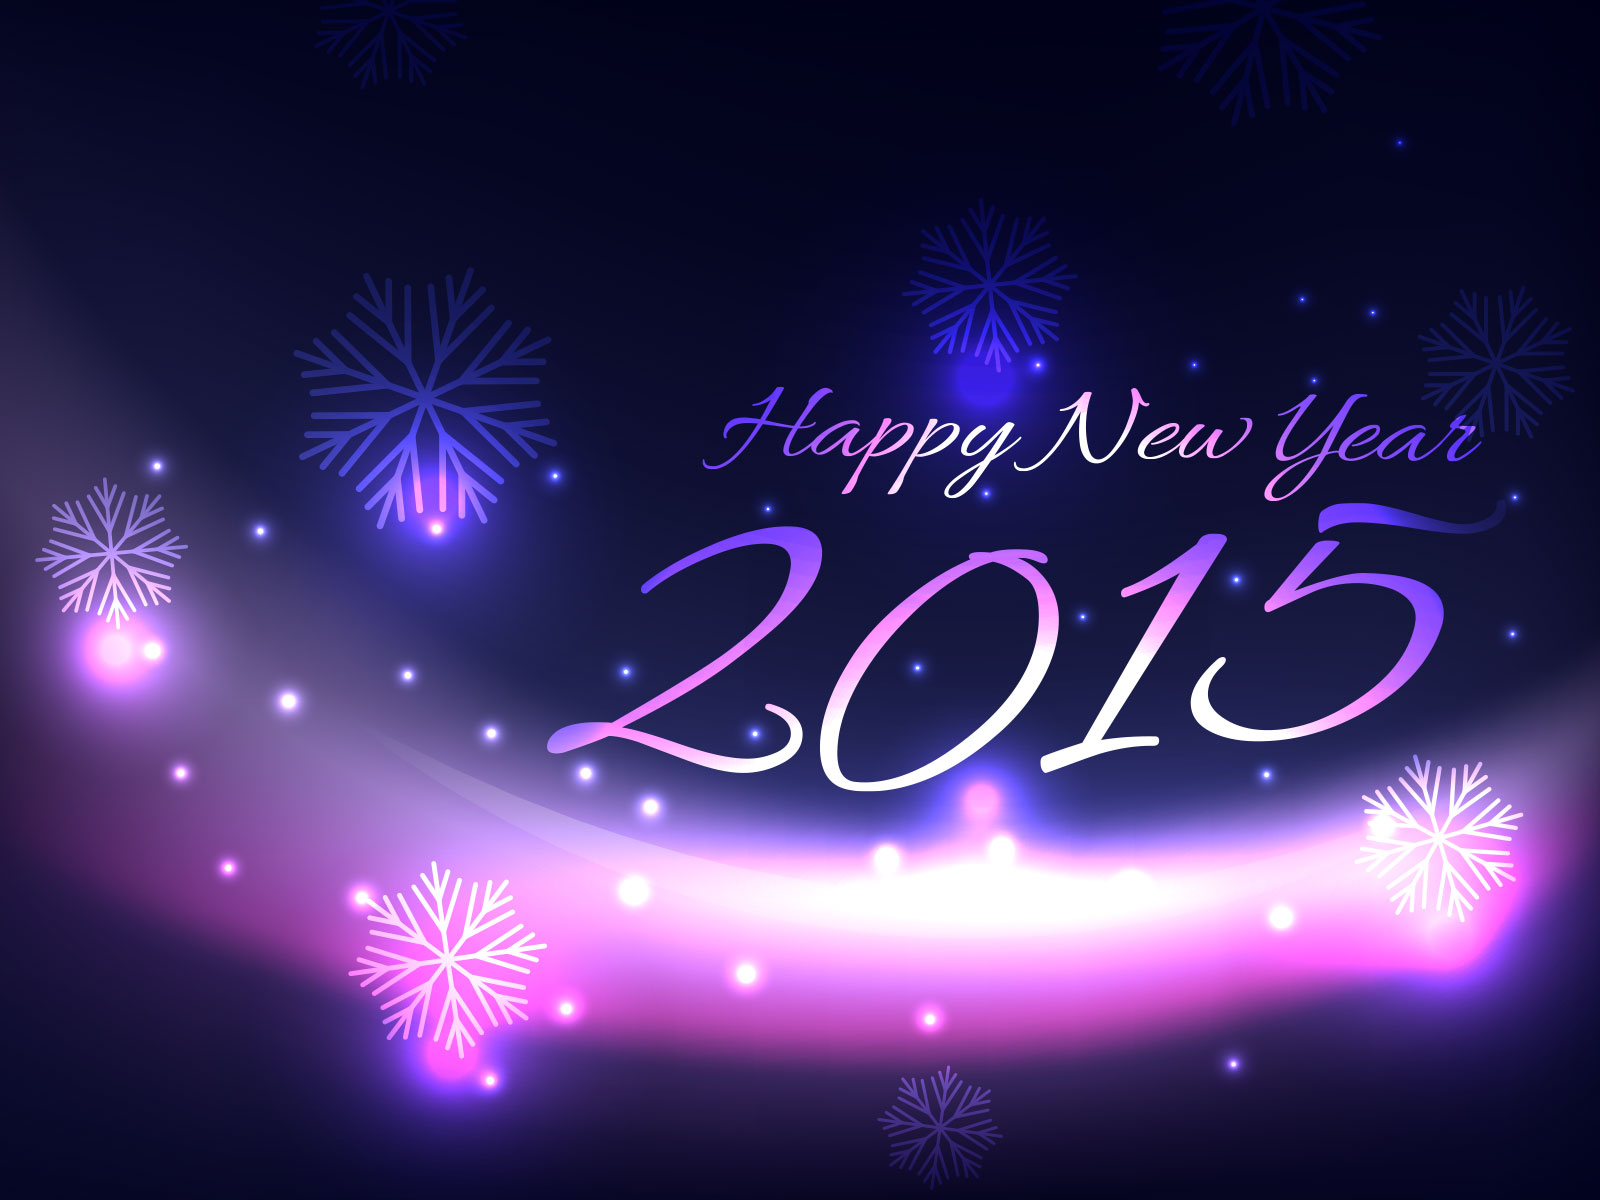 Untitled 1 Happy New Year 2015 Wallpapers Images Cover